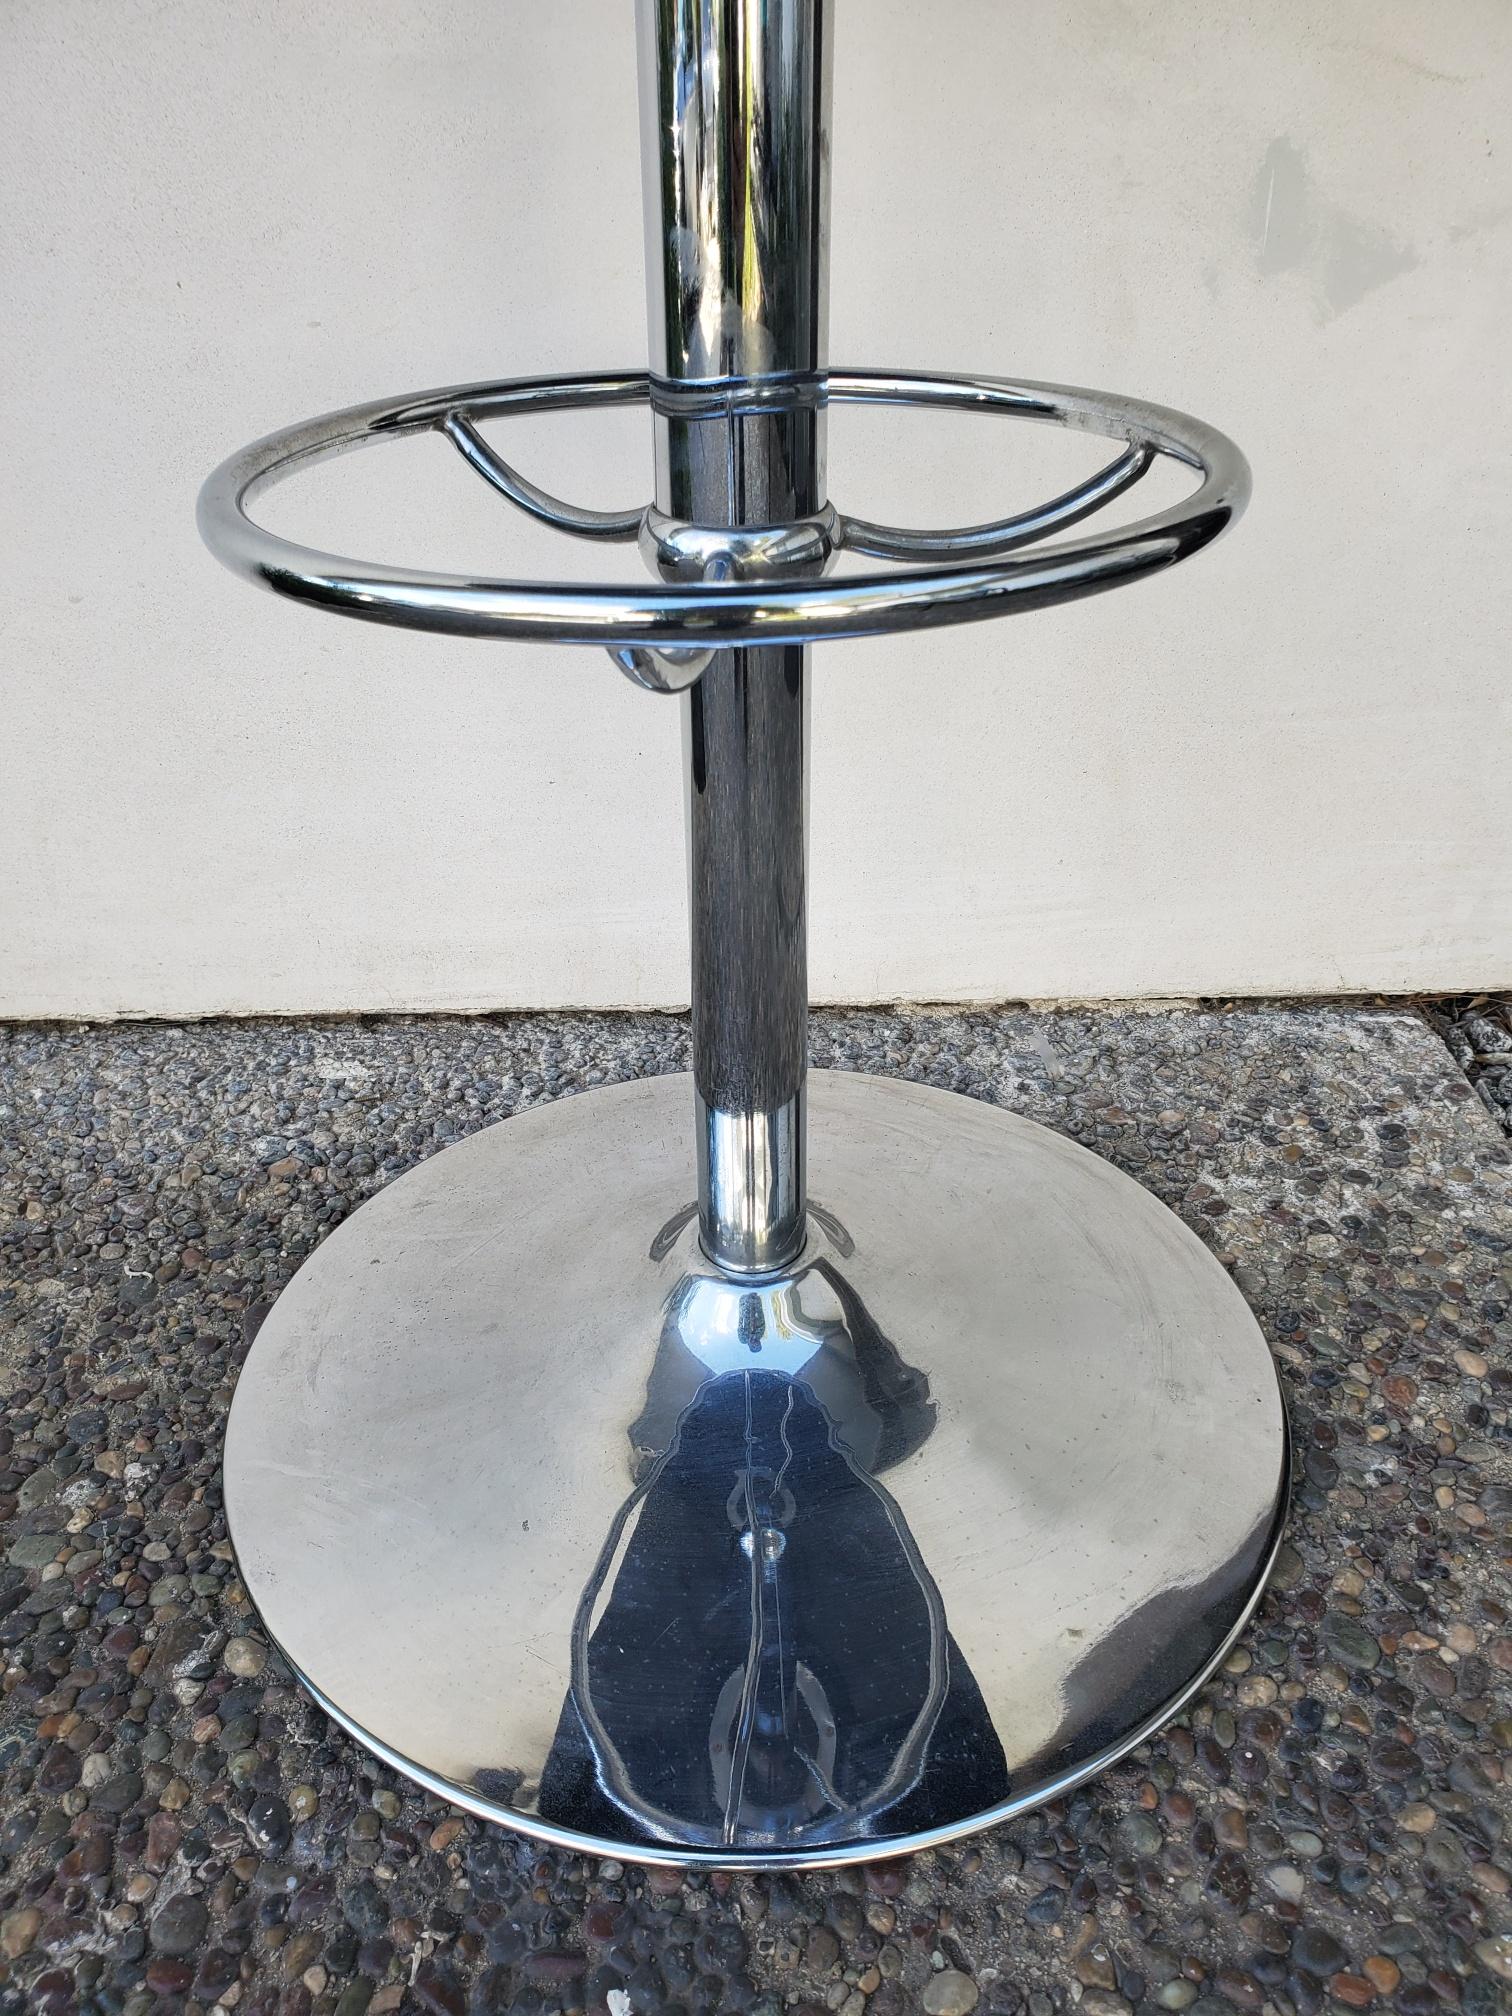 Stunning chrome stem with fiber glass top cocktail tables with adjustable height. 

Measures: diameter 23 x height shortest length 35
Full height 43.5.